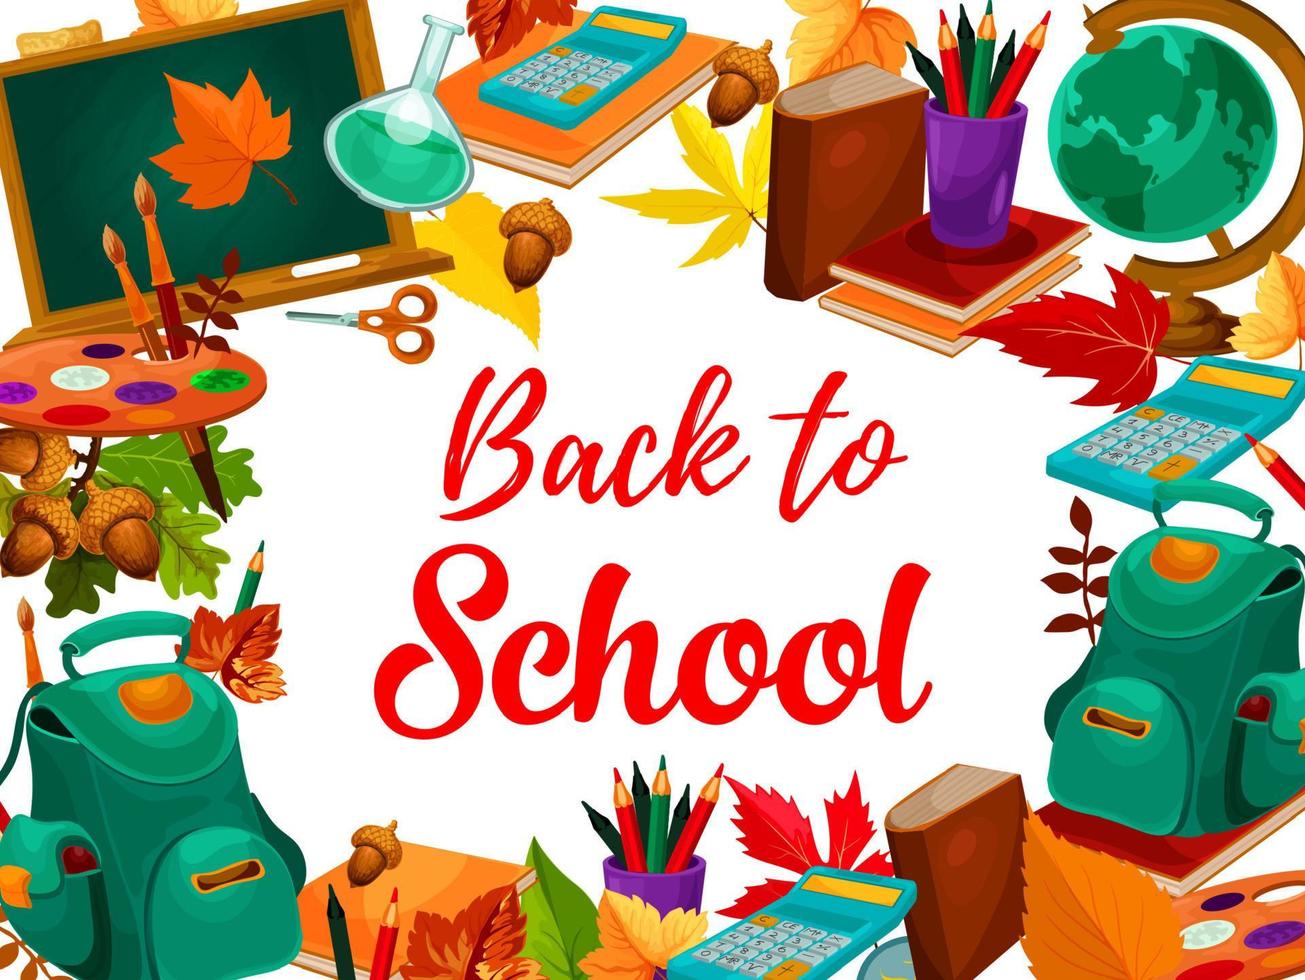 Education supplies poster, back to school design vector